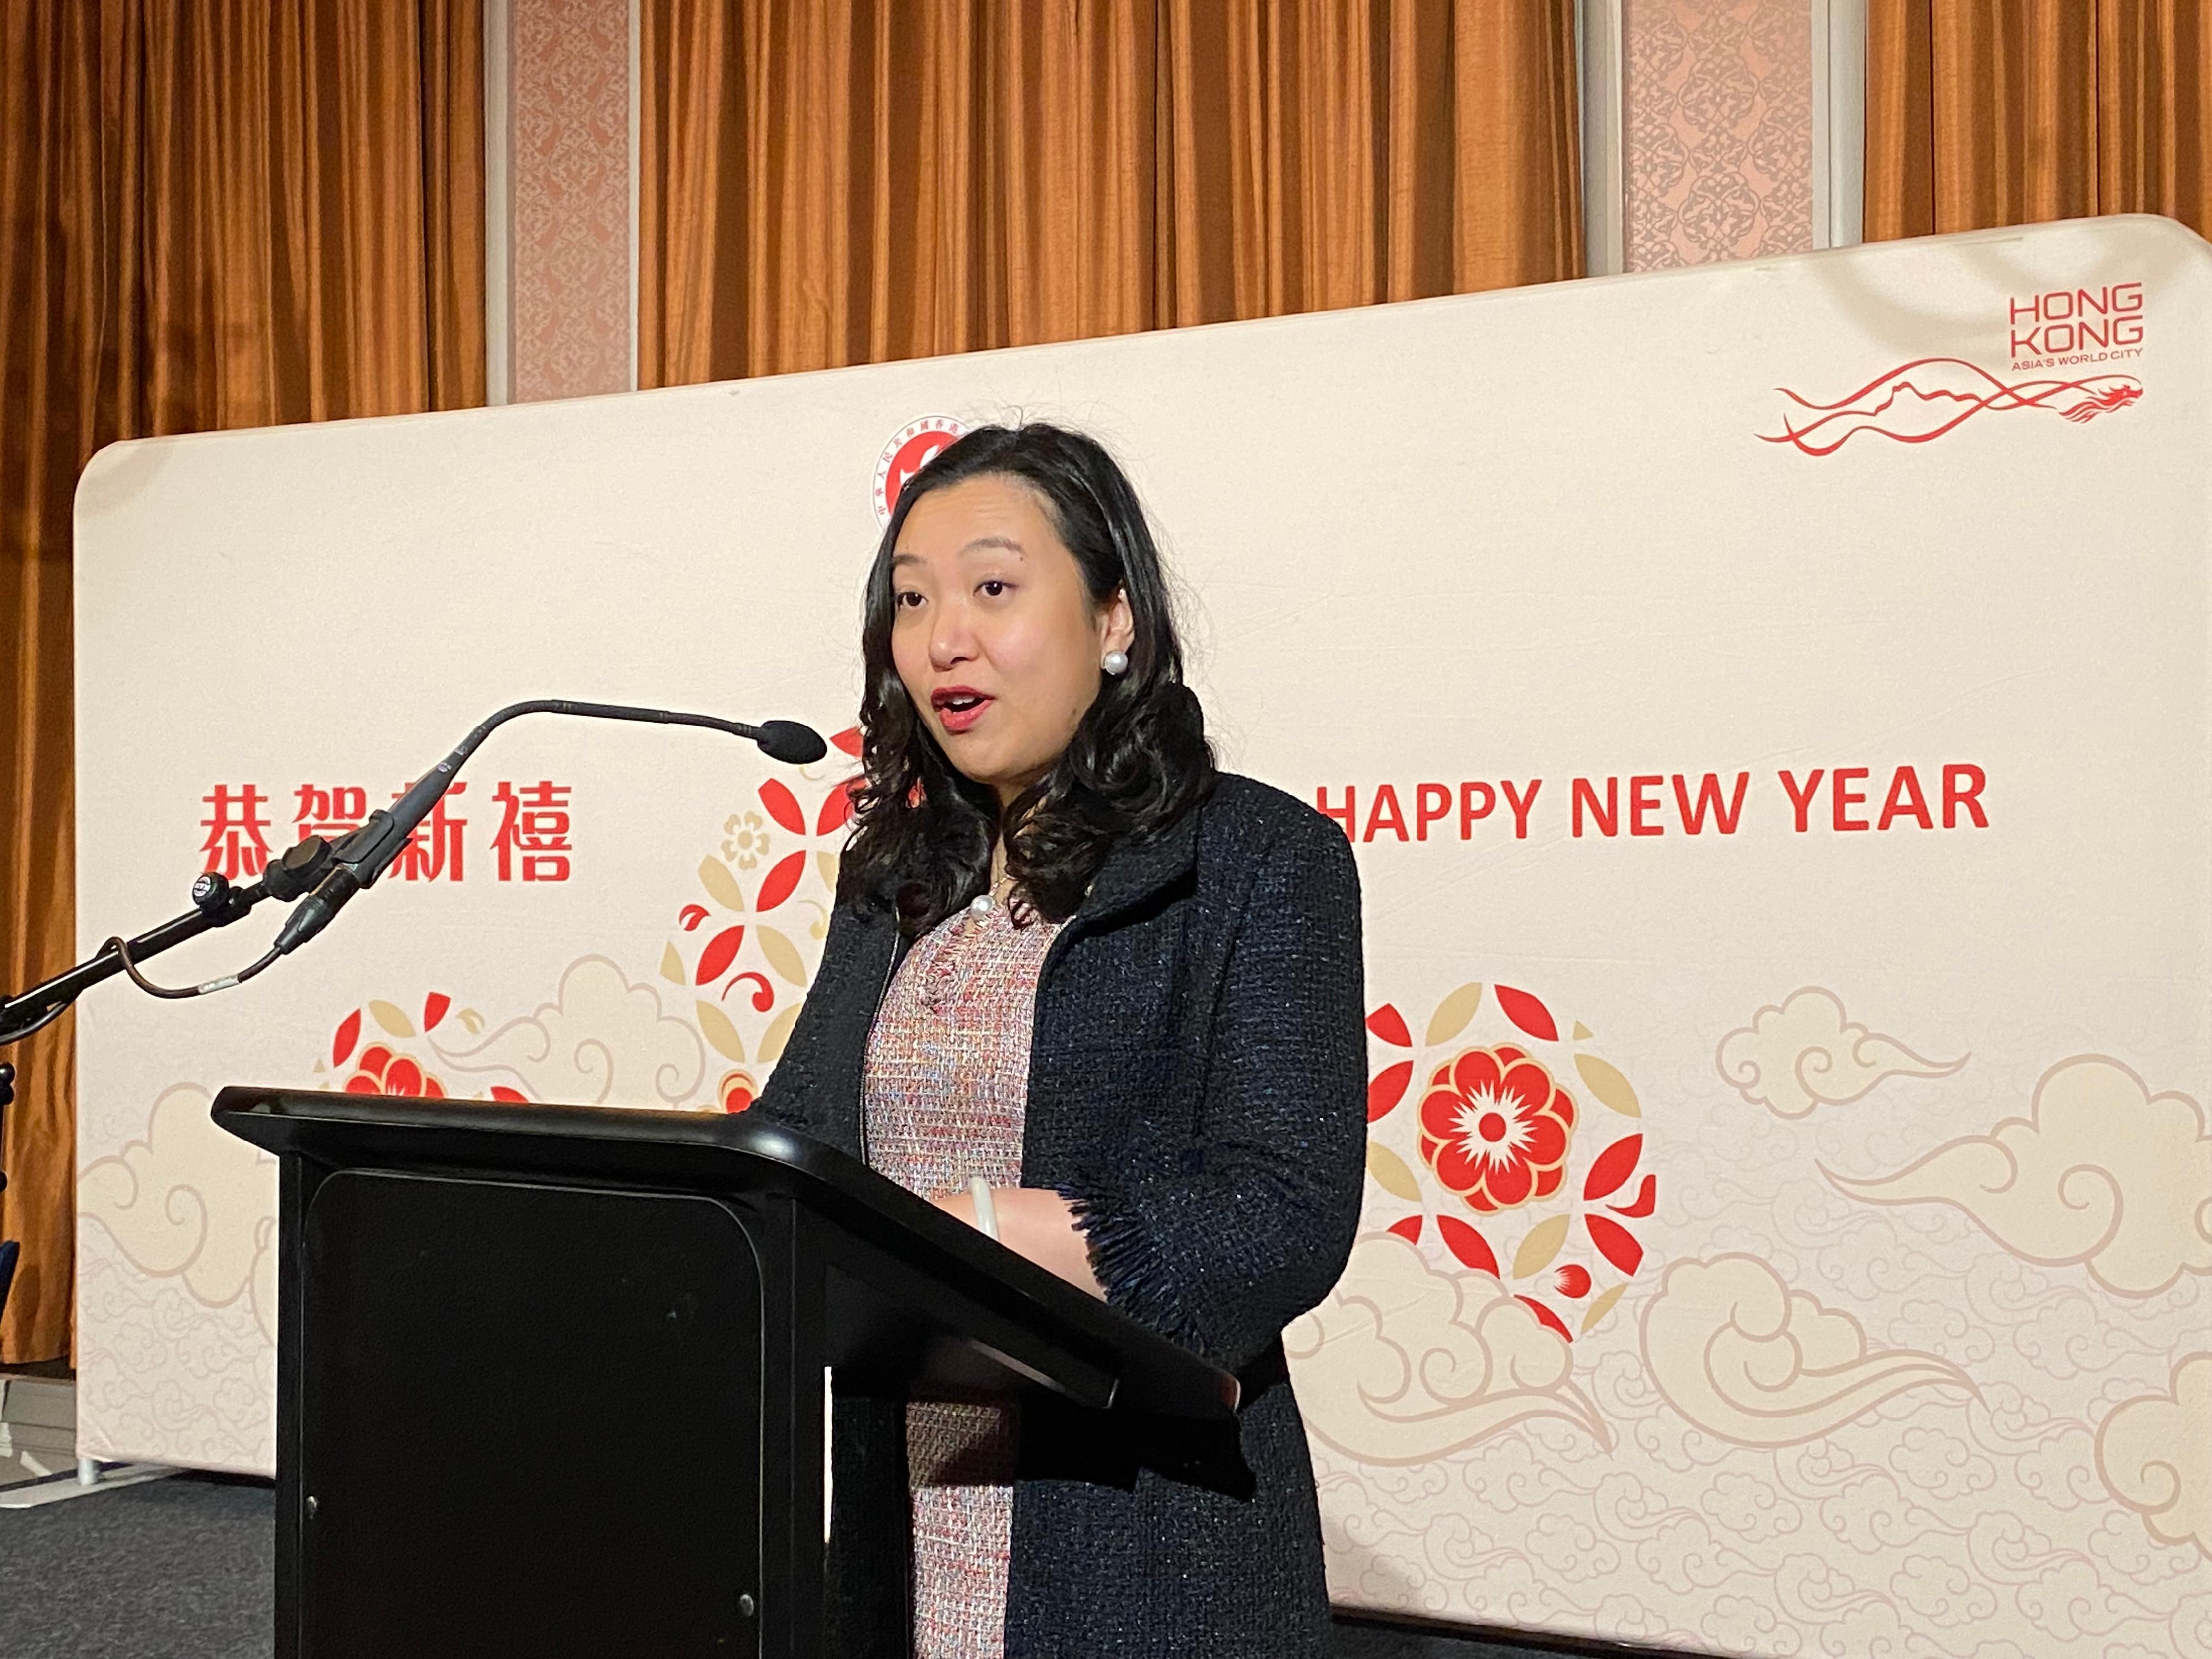 The Acting Special Representative for Hong Kong Economic and Trade Affairs to the European Union, Miss Grace Li, addressed guests at the Chinese New Year reception in The Hague on January 25 (Luxembourg time).